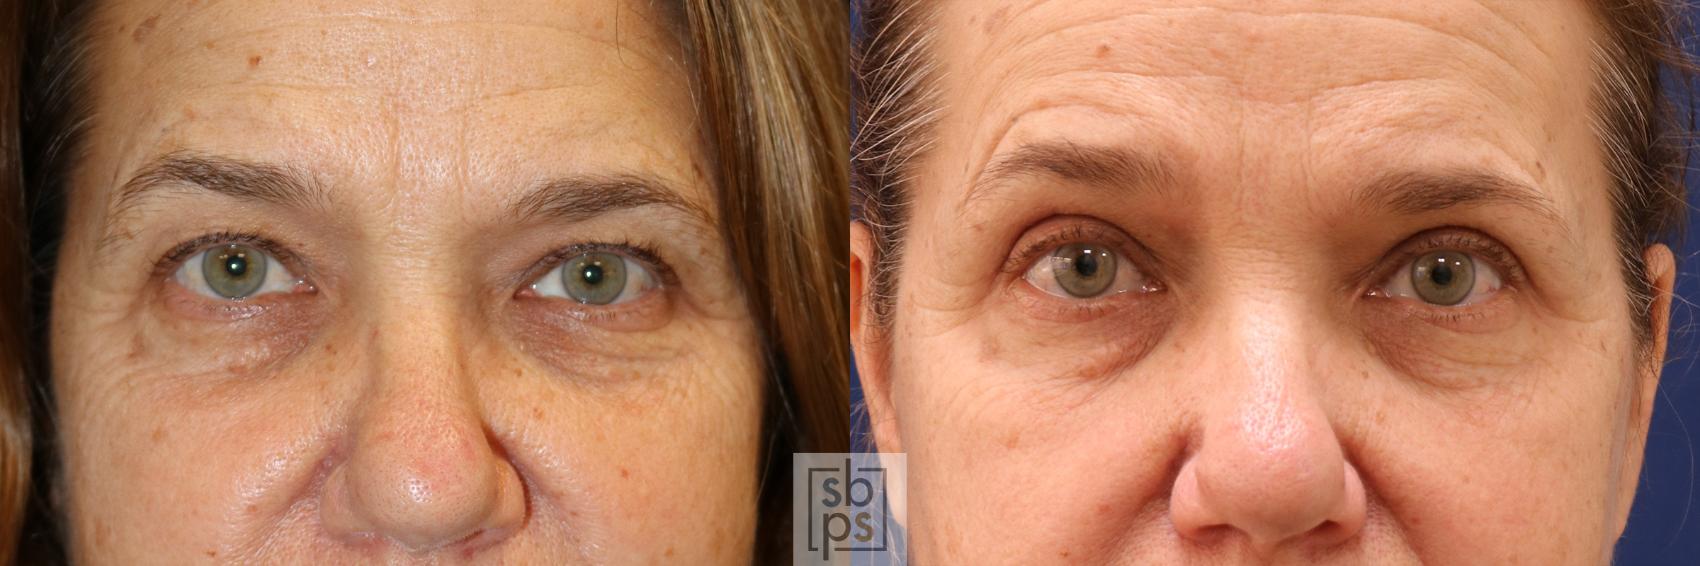 Before & After Eyelid Surgery (Blepharoplasty) Case 562 Front View in Torrance, CA